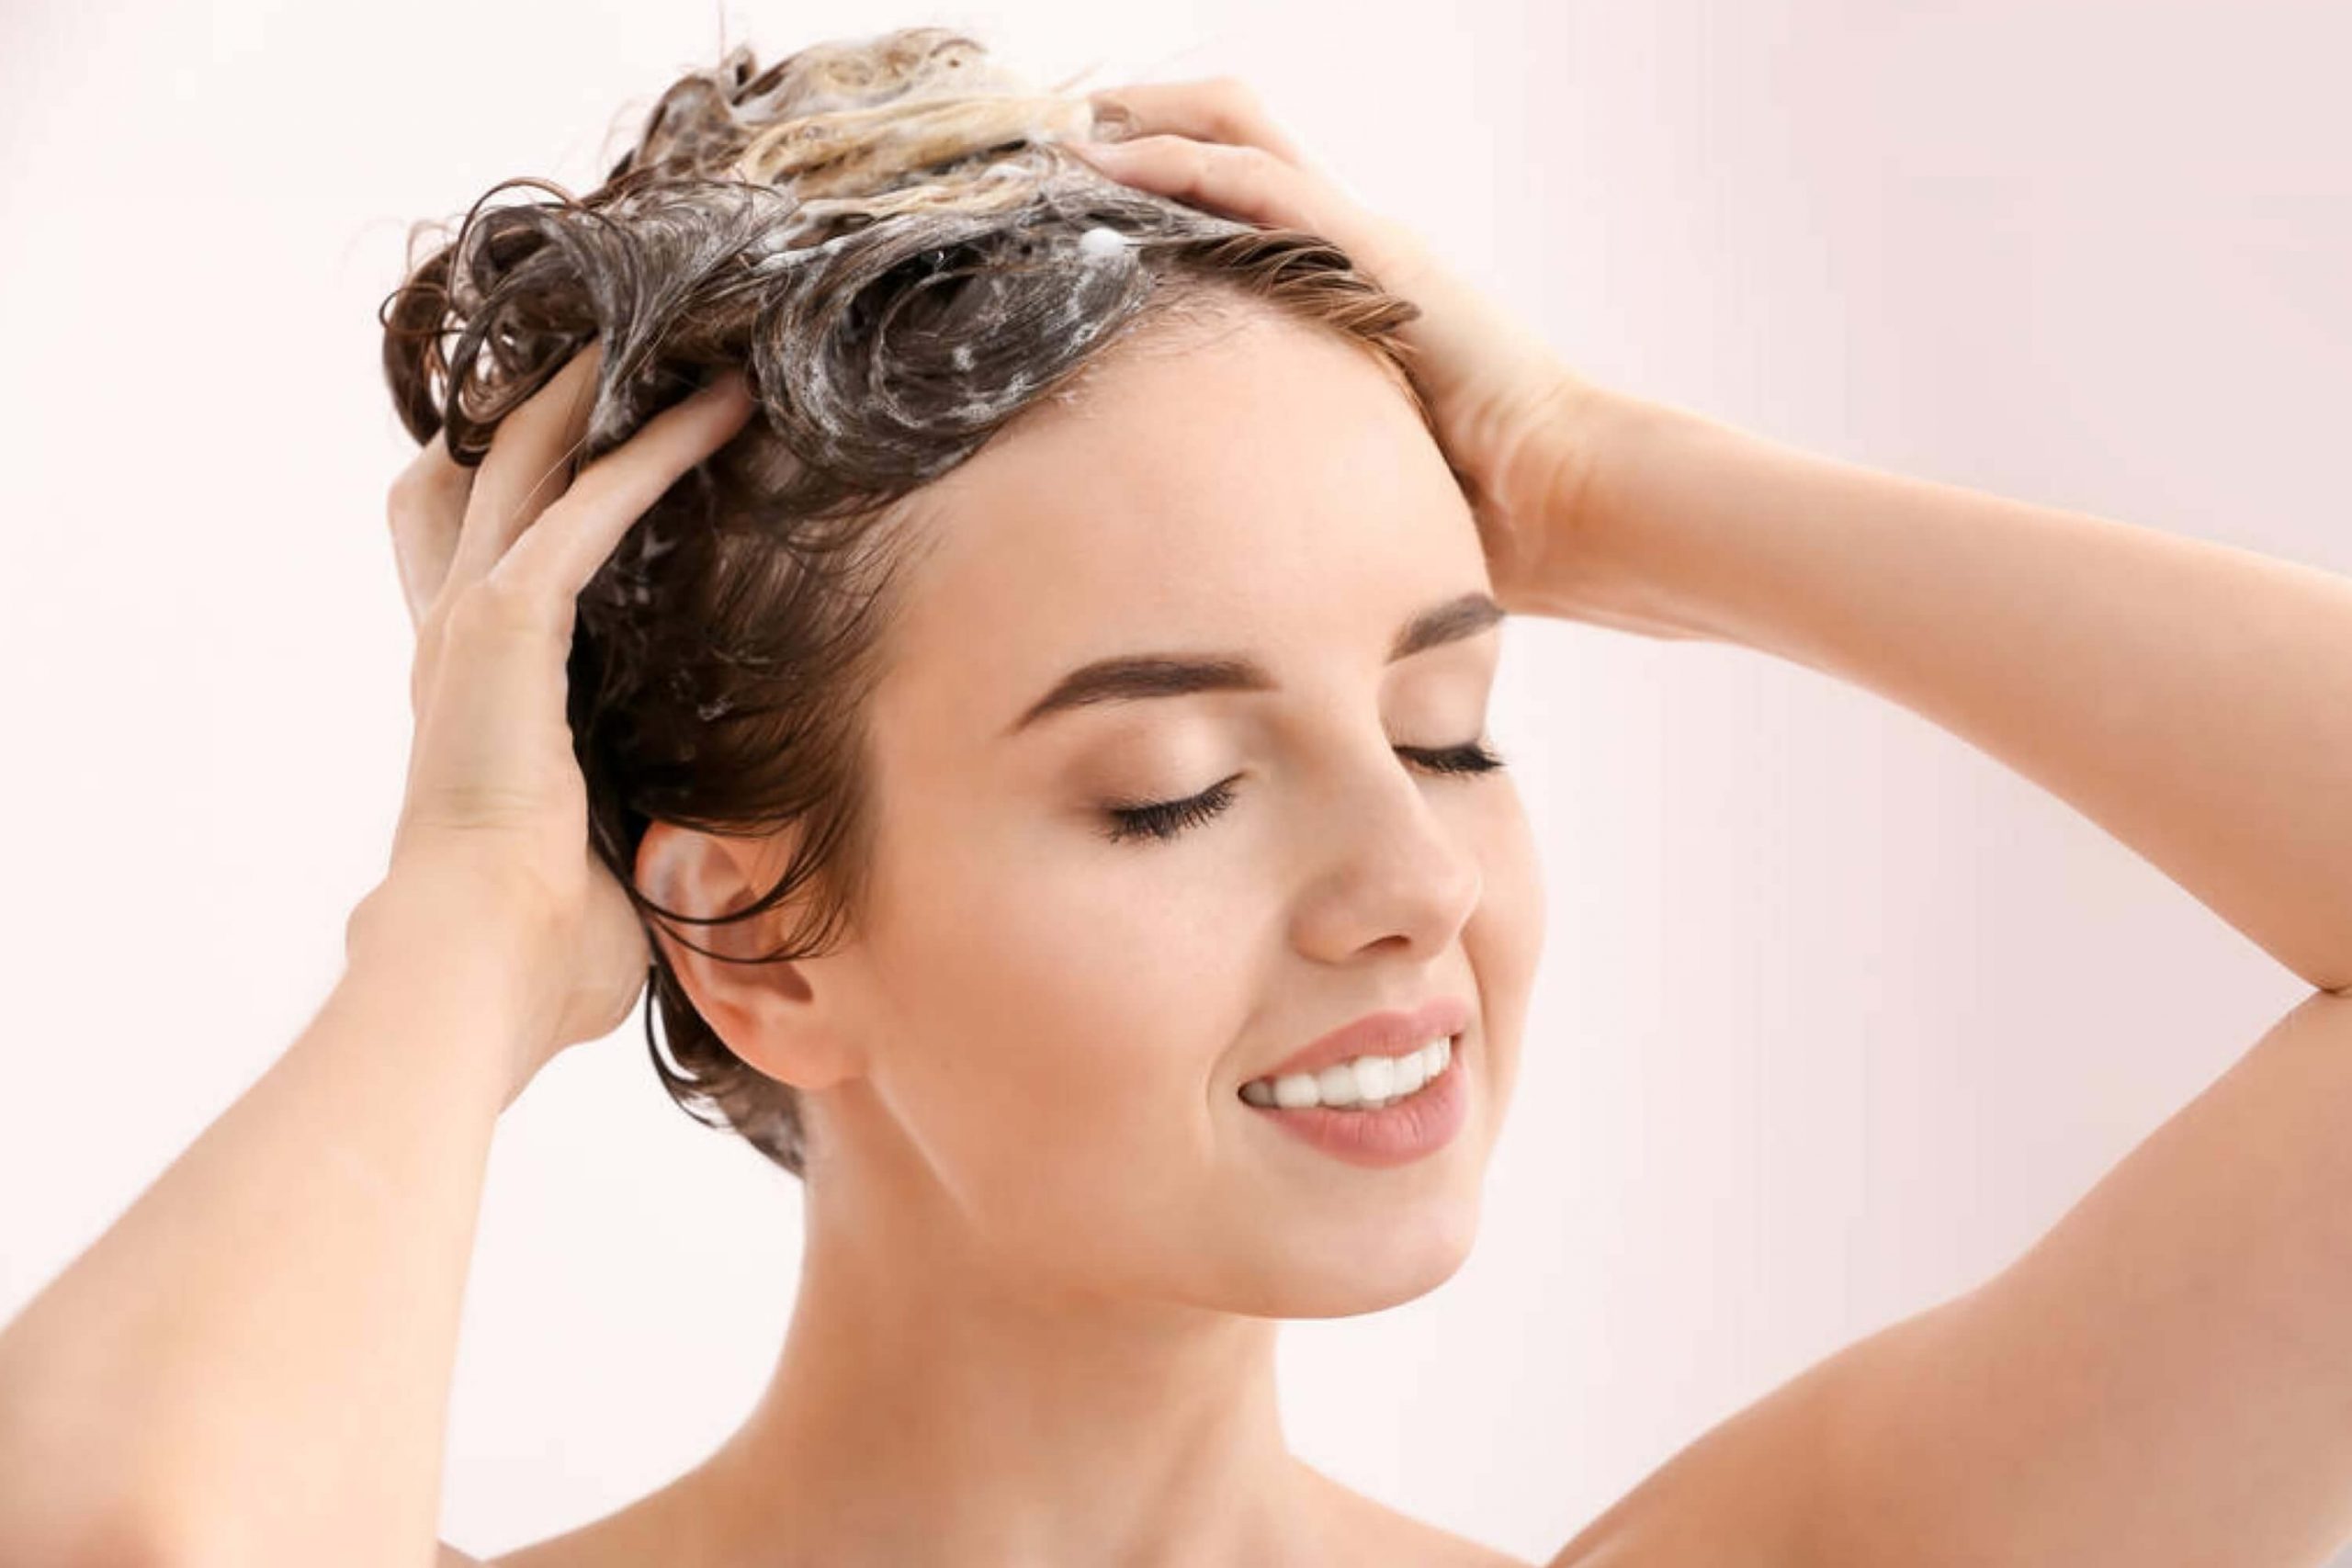 Wash Your Hair Once Or Twice Per Week Using a Gentle Shampoo